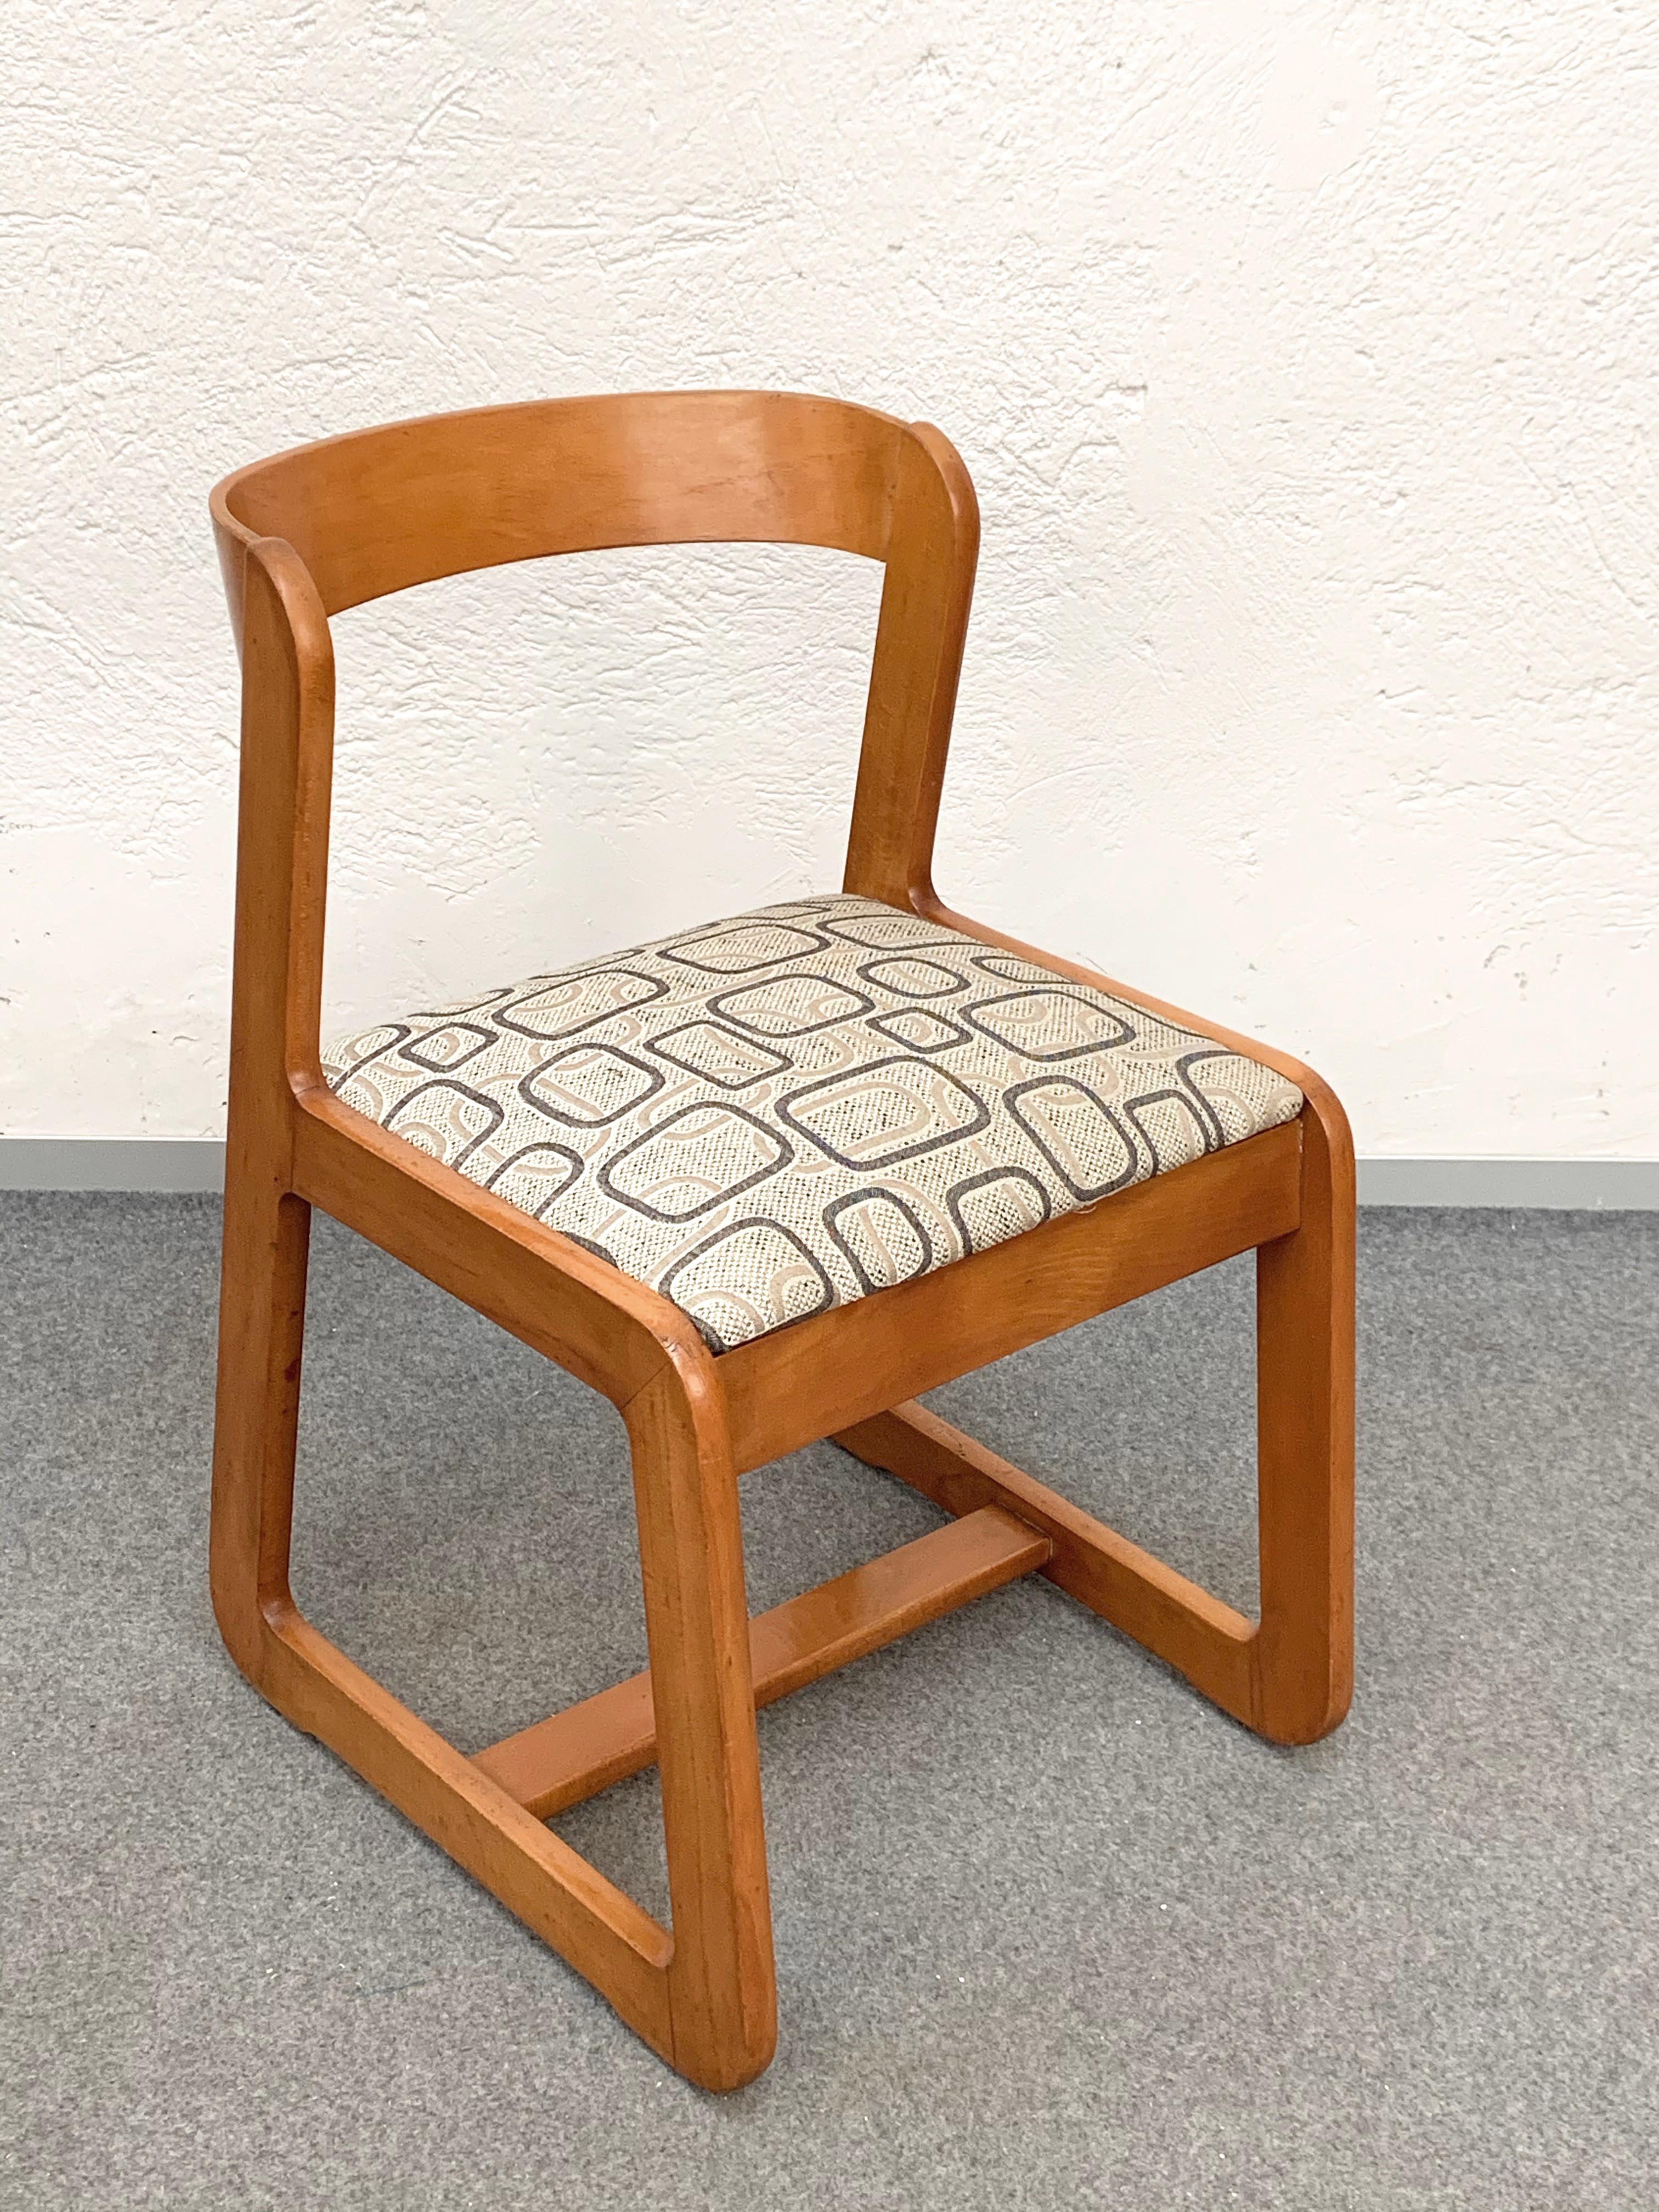 Willy Rizzo Midcentury Wooden and Fabric Italian Chairs for Mario Sabot, 1970 2